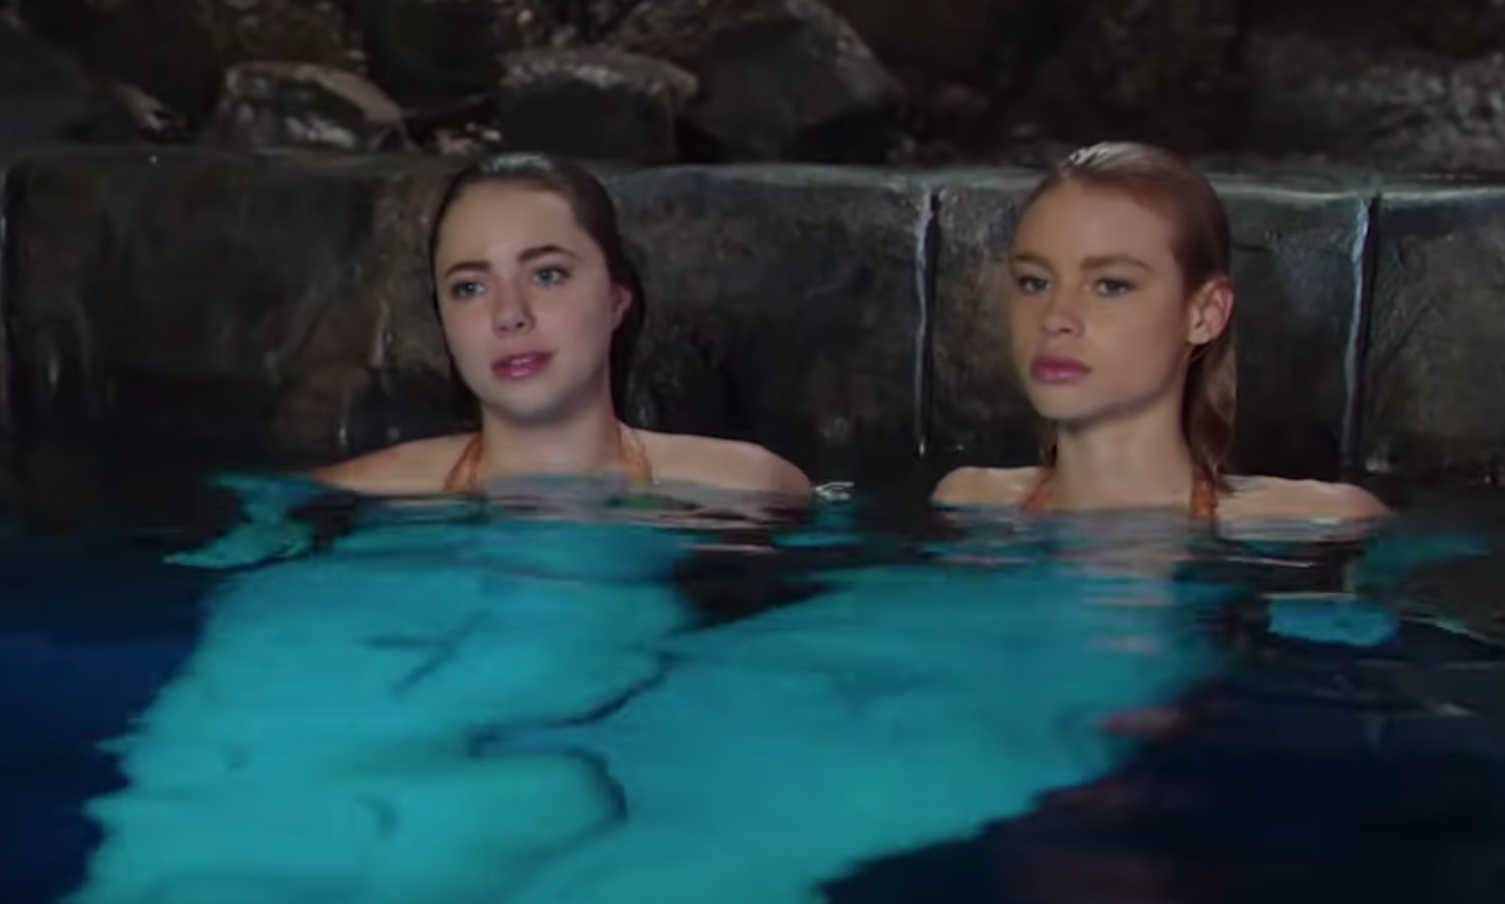 Two mermaids sit in the water together